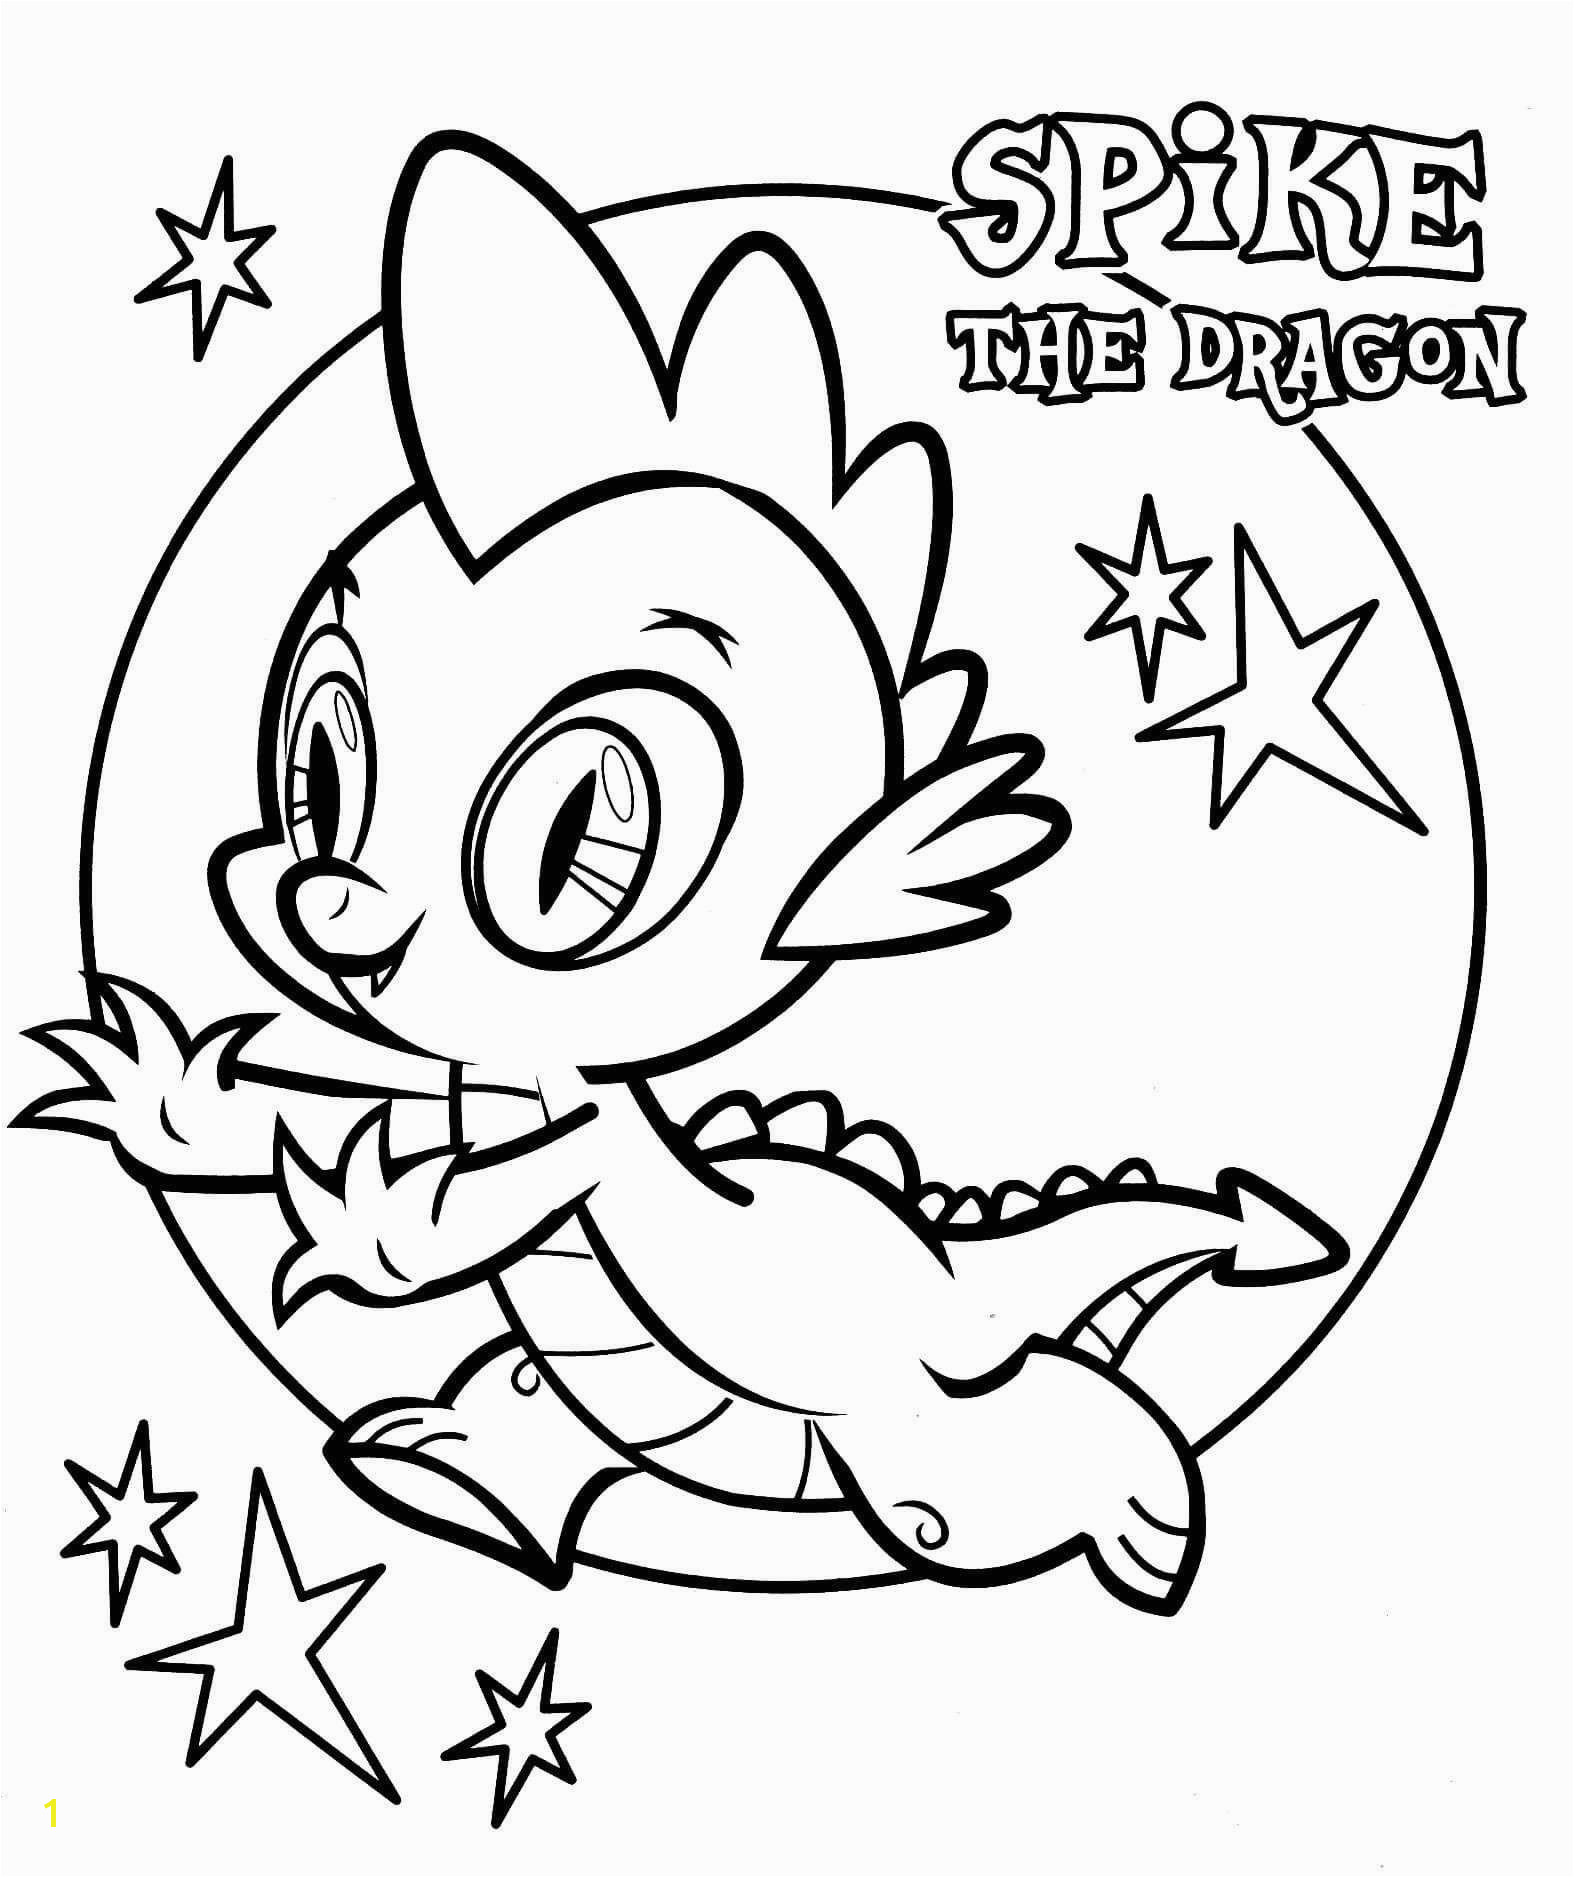 Spike the Dragon Coloring Pages